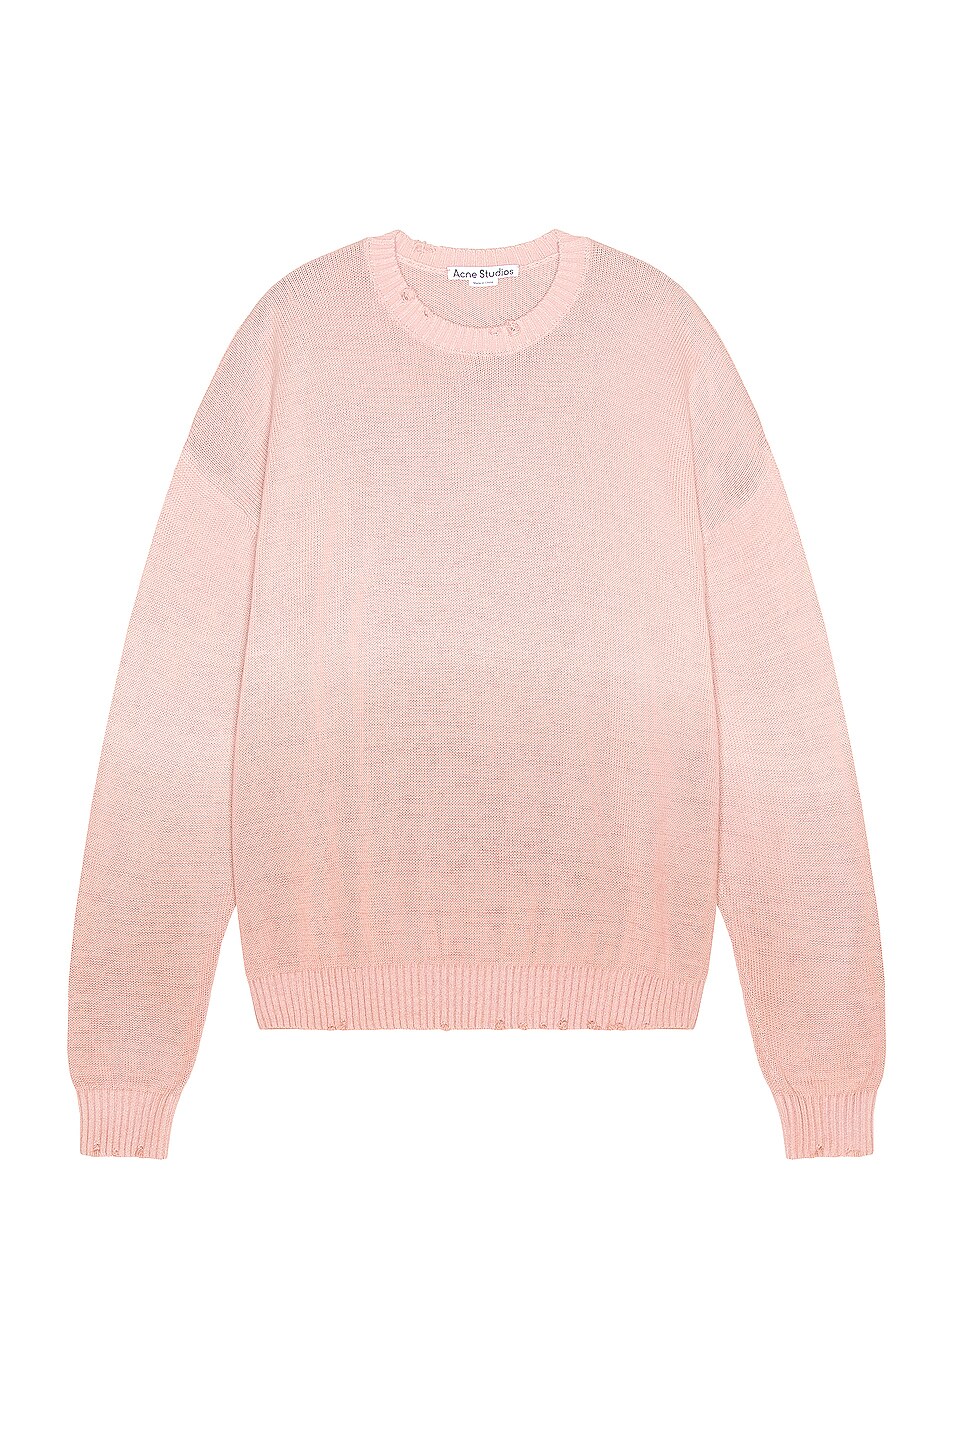 Acne Studios Knit Sweater in Blossom Pink | FWRD